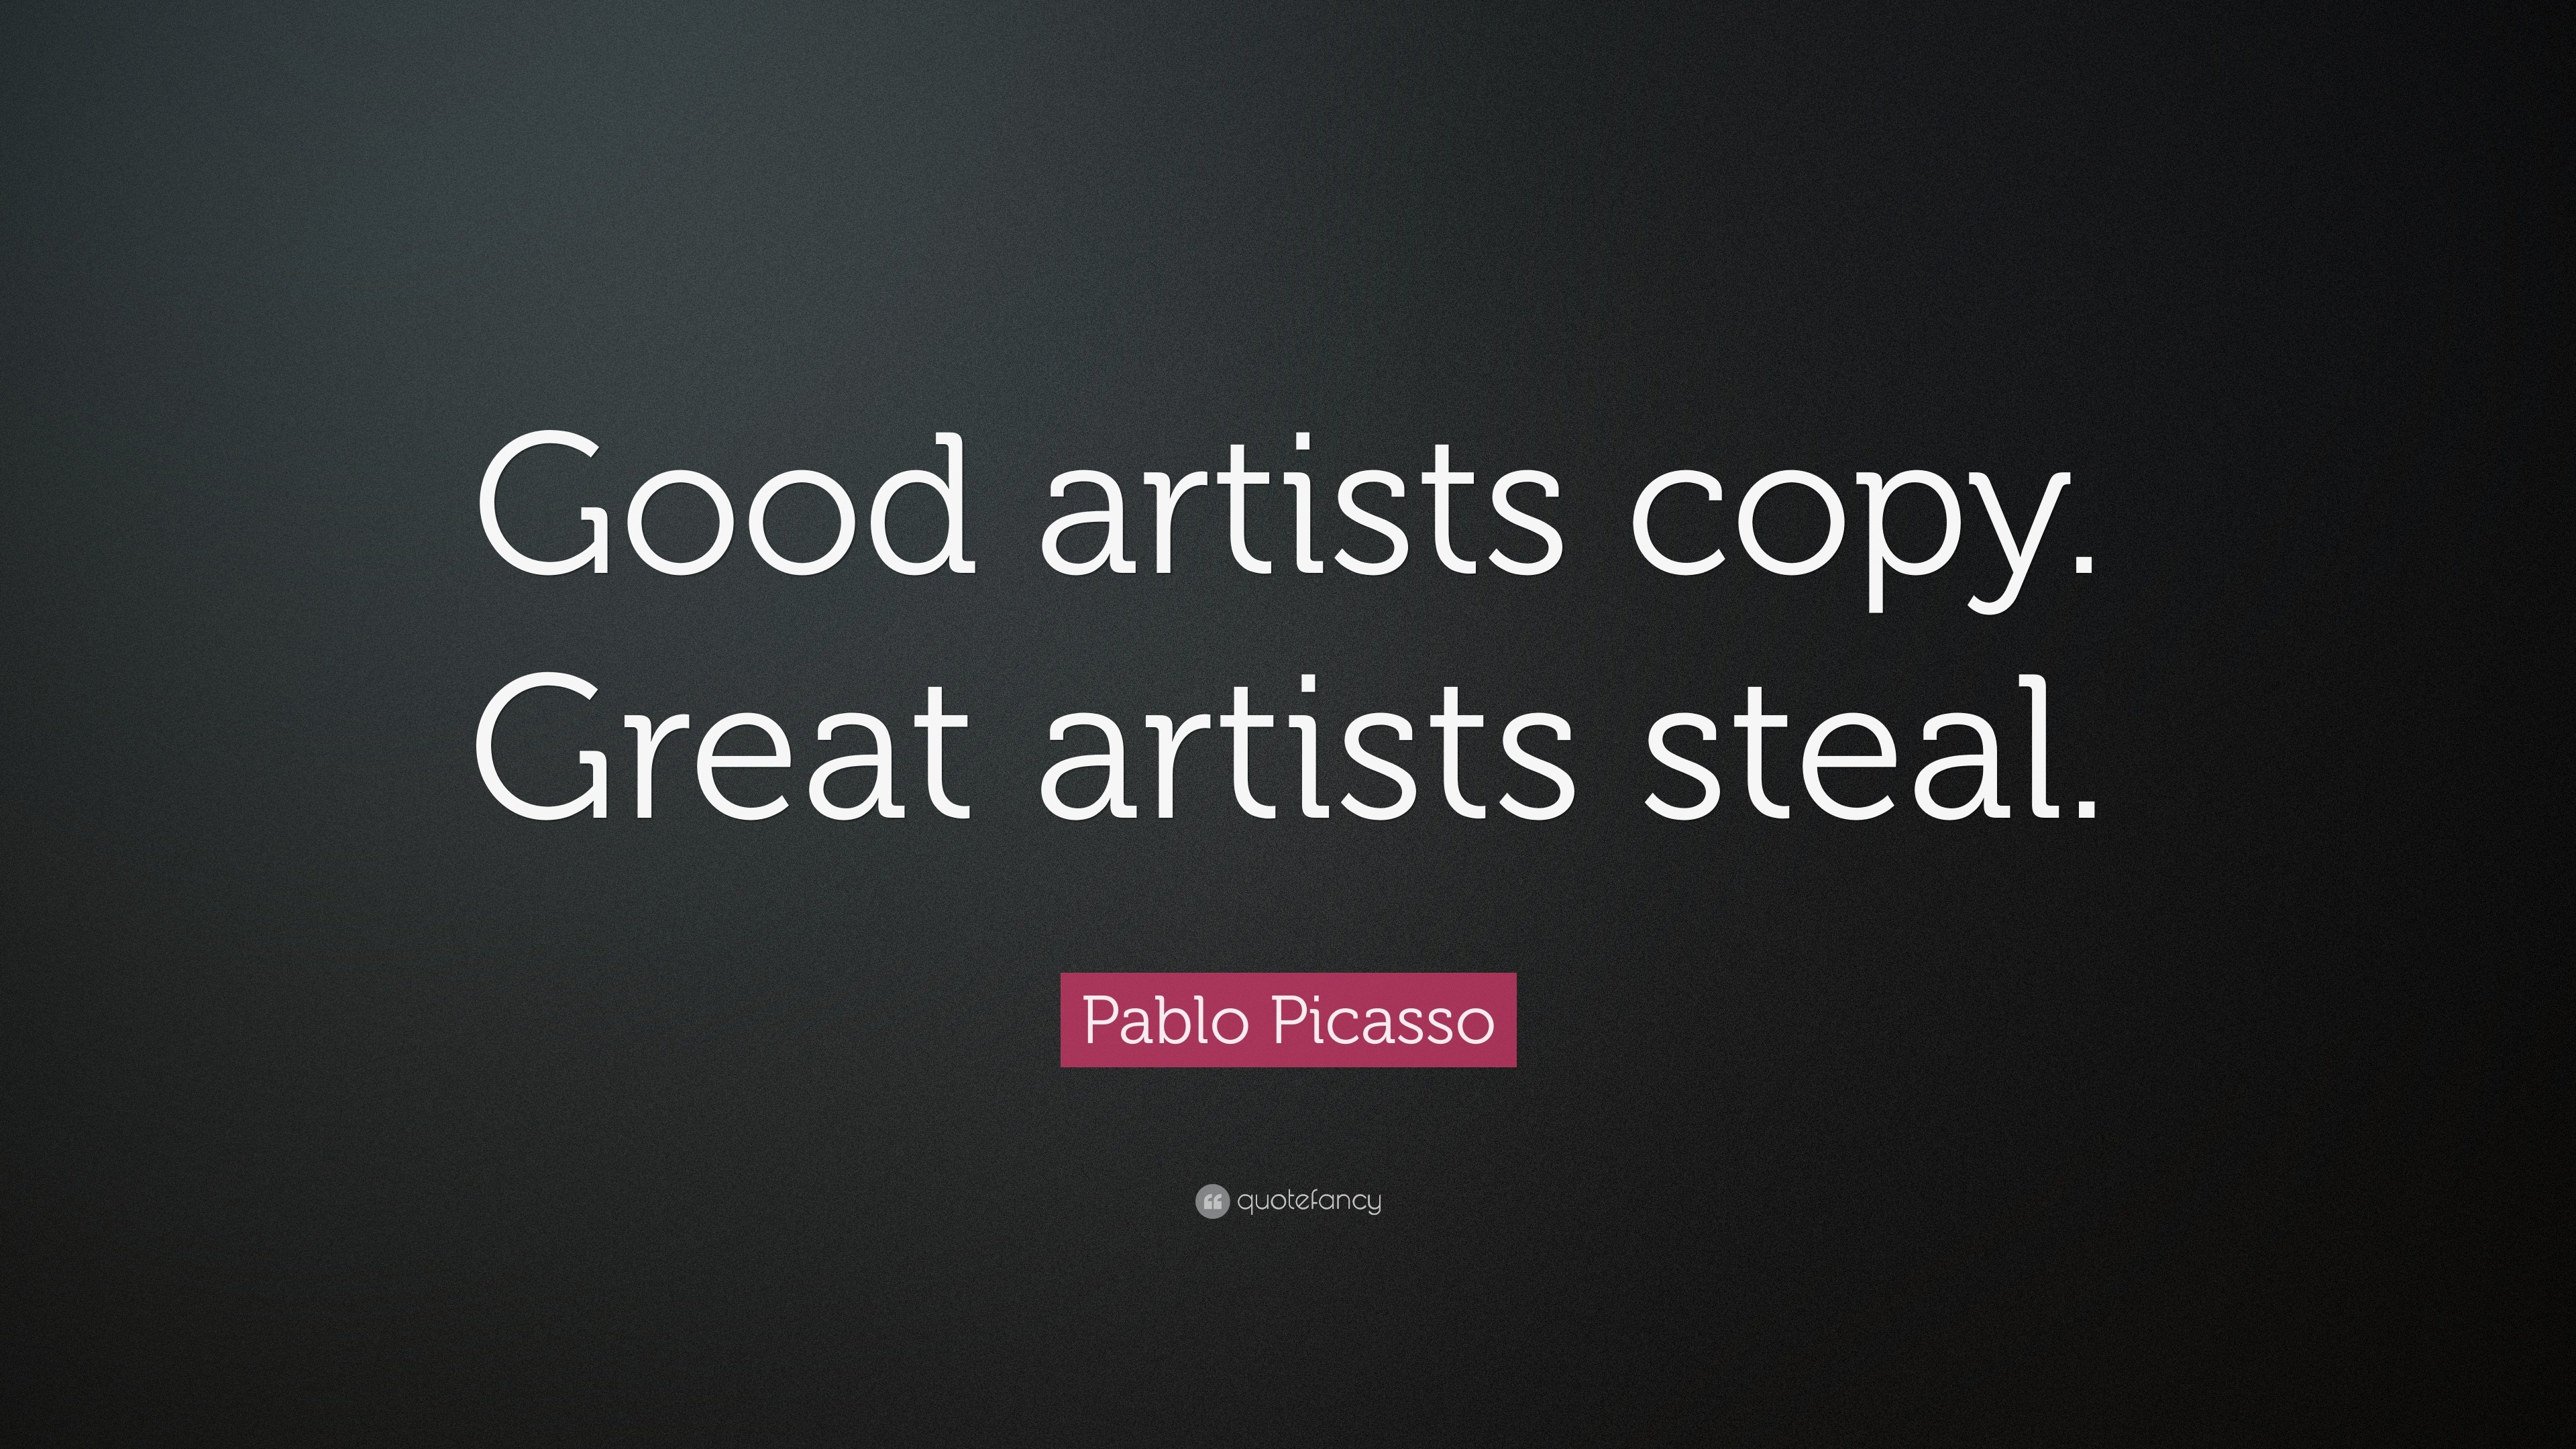 Pablo Picasso Quote: “Good artists copy. Great artists steal.”